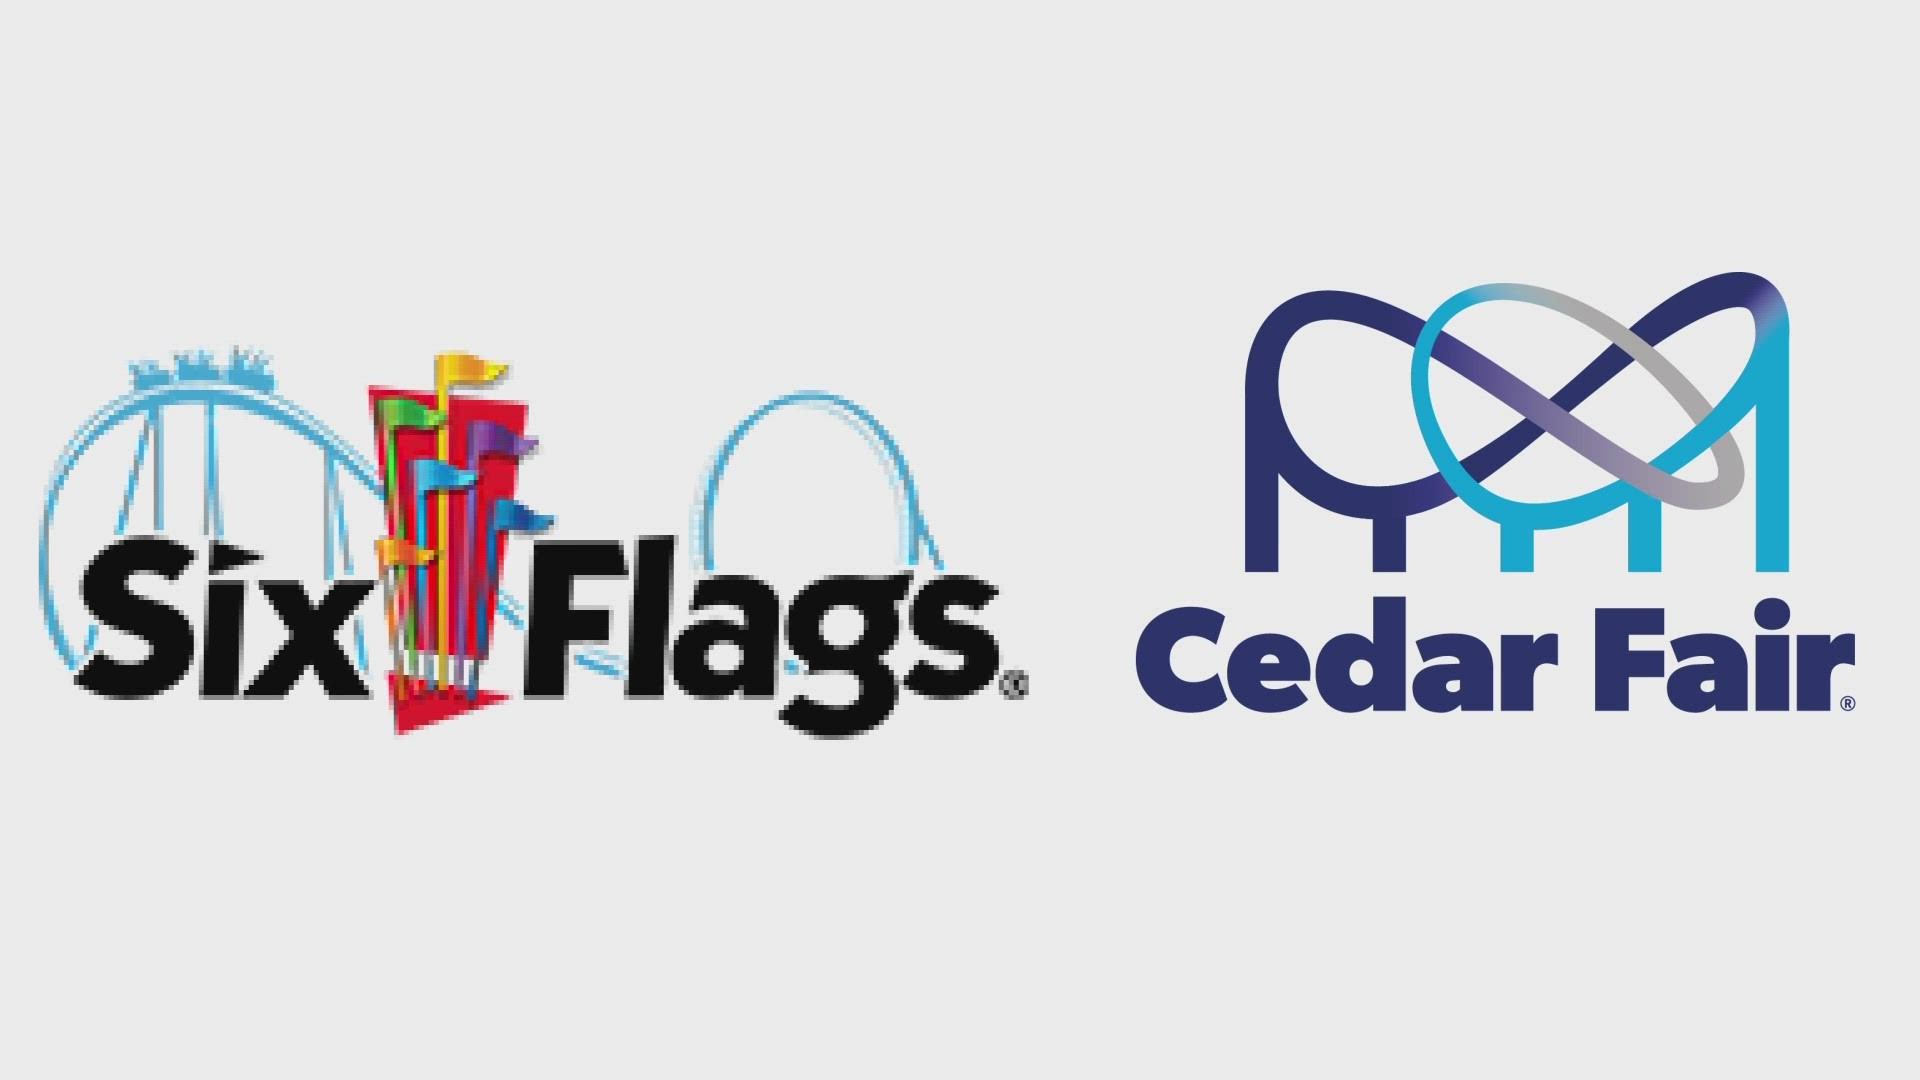 Cedar Fair Entertainment Point has reportedly struck a deal that will merge them with Six Flags according to the Wall Street Journal.